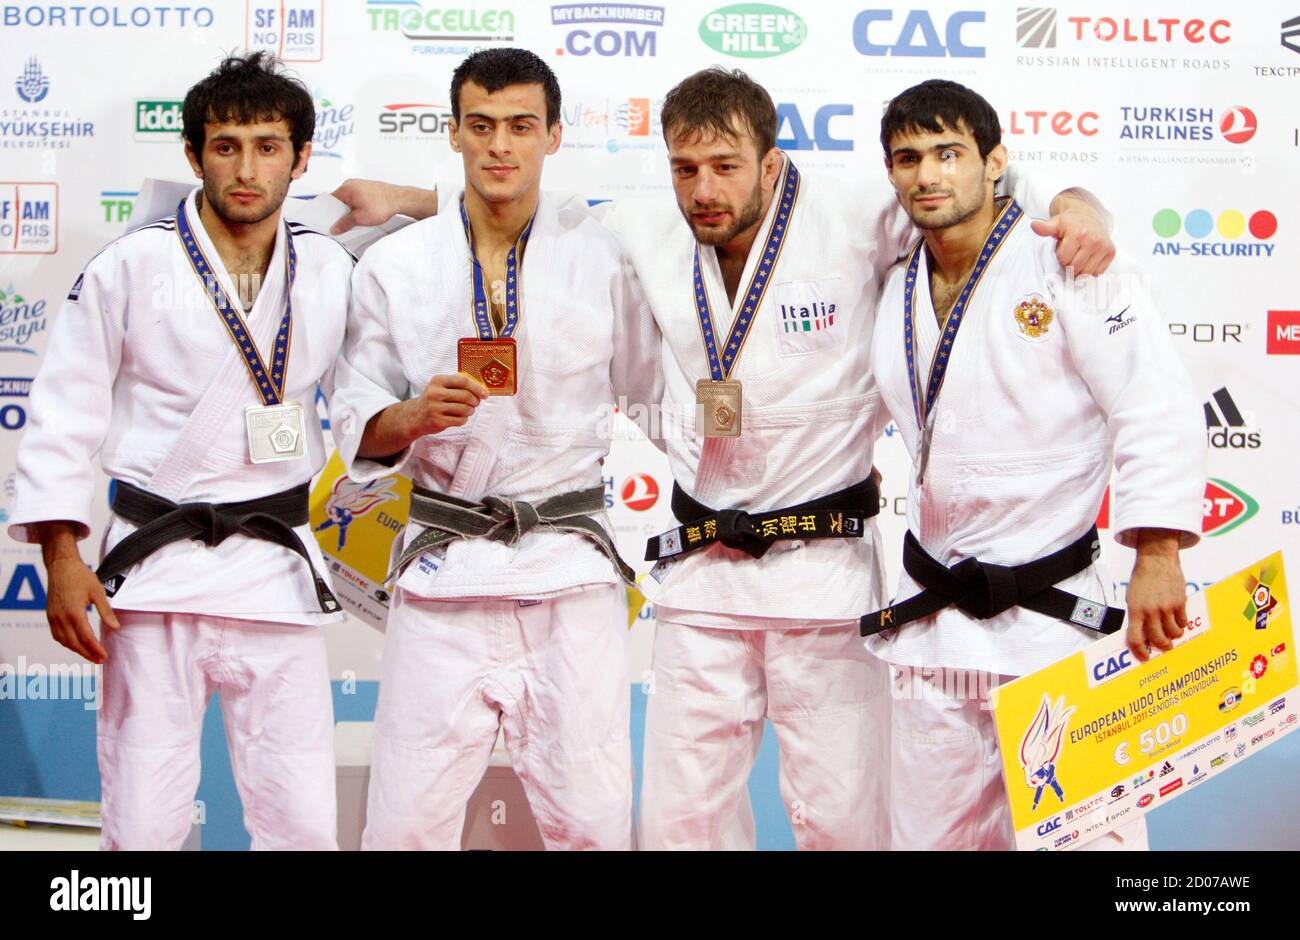 Gold medallist Ukraine's Georgii Zantaraia (2nd L) poses with silver medallist Georgia's Betkil Shukvani (L), bronze medallists Russia's Arsen Galstyan (R) and Italy's Elio Verde (2nd R) during a ceremony for the men's under 60 kg category at the Judo European Championships in Istanbul April 21, 2011. REUTERS/Osman Orsal (TURKEY - Tags: SPORT JUDO) Stock Photo